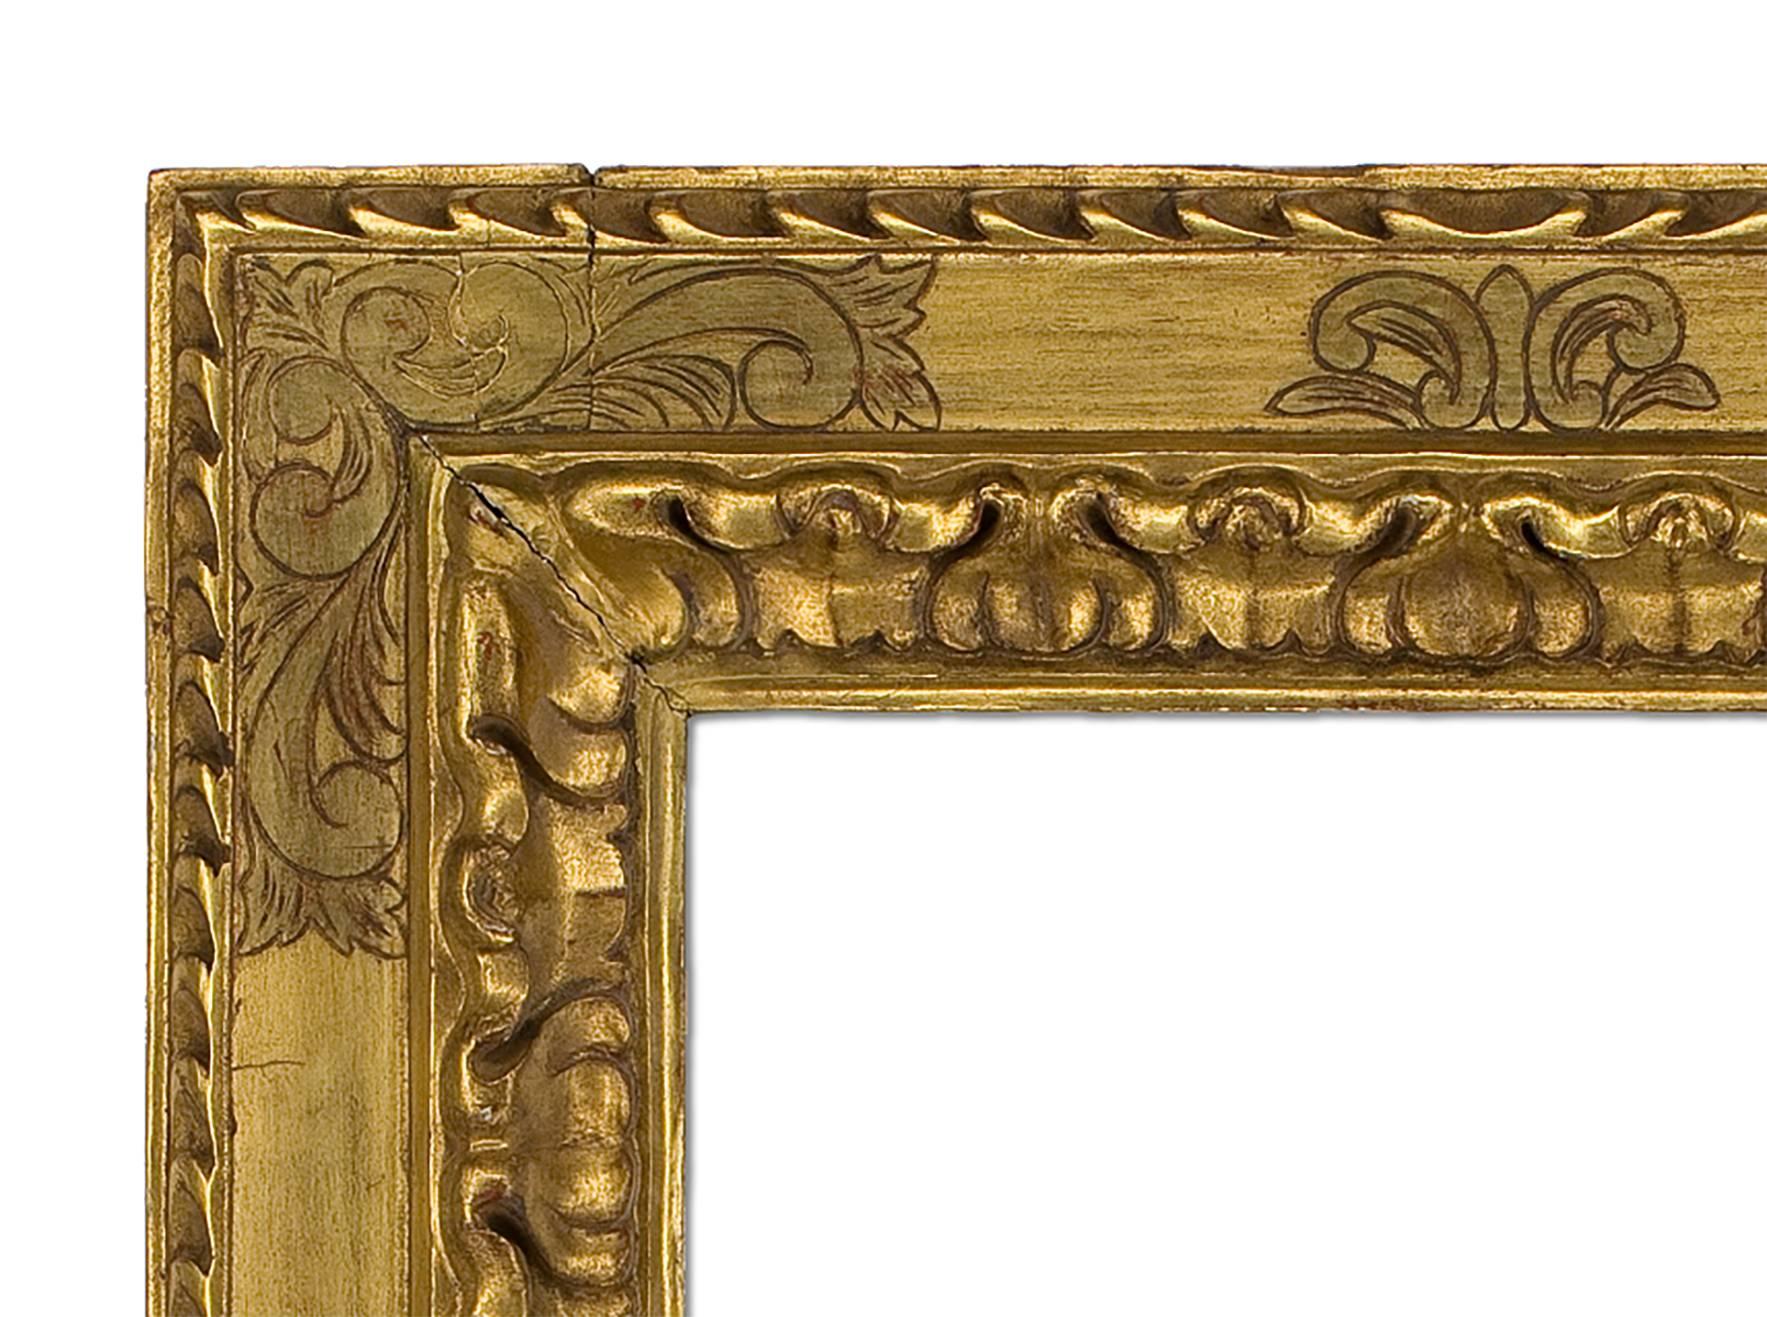 Hand-carved and gilt 18th century Italian style mirror with incised design in corners and centres. Measures: 24